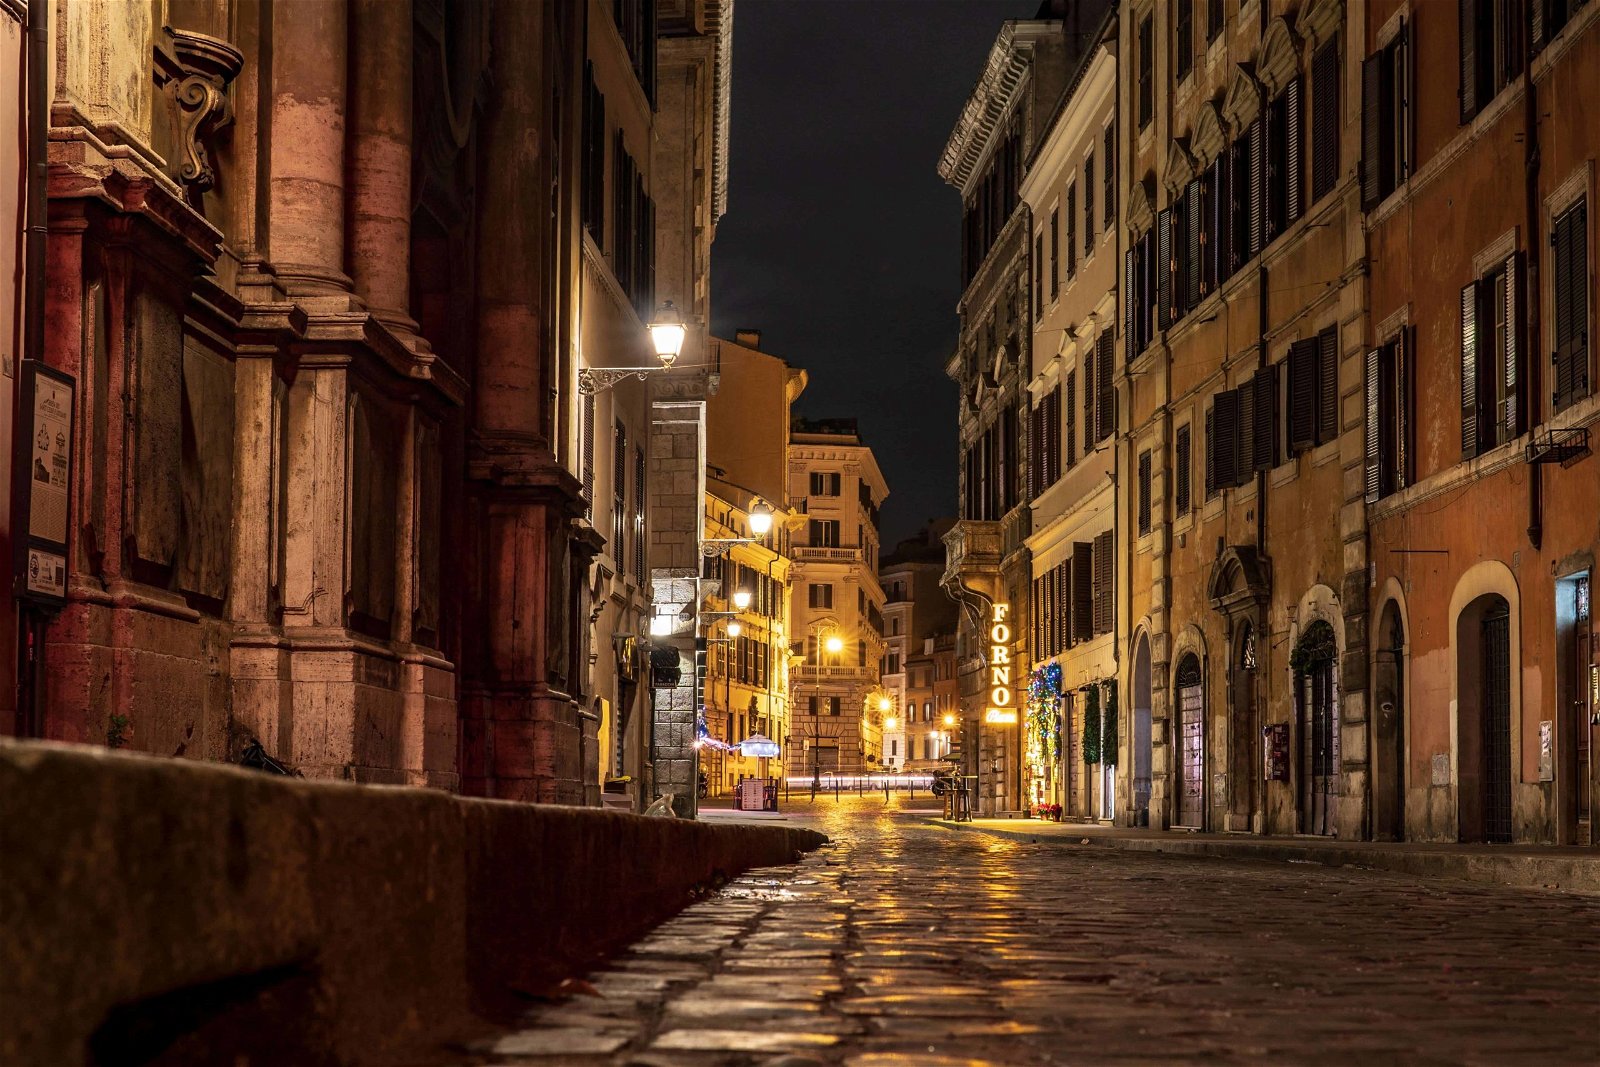 Sometimes deserted streets at night, such as those seen here, tell a compelling stories.